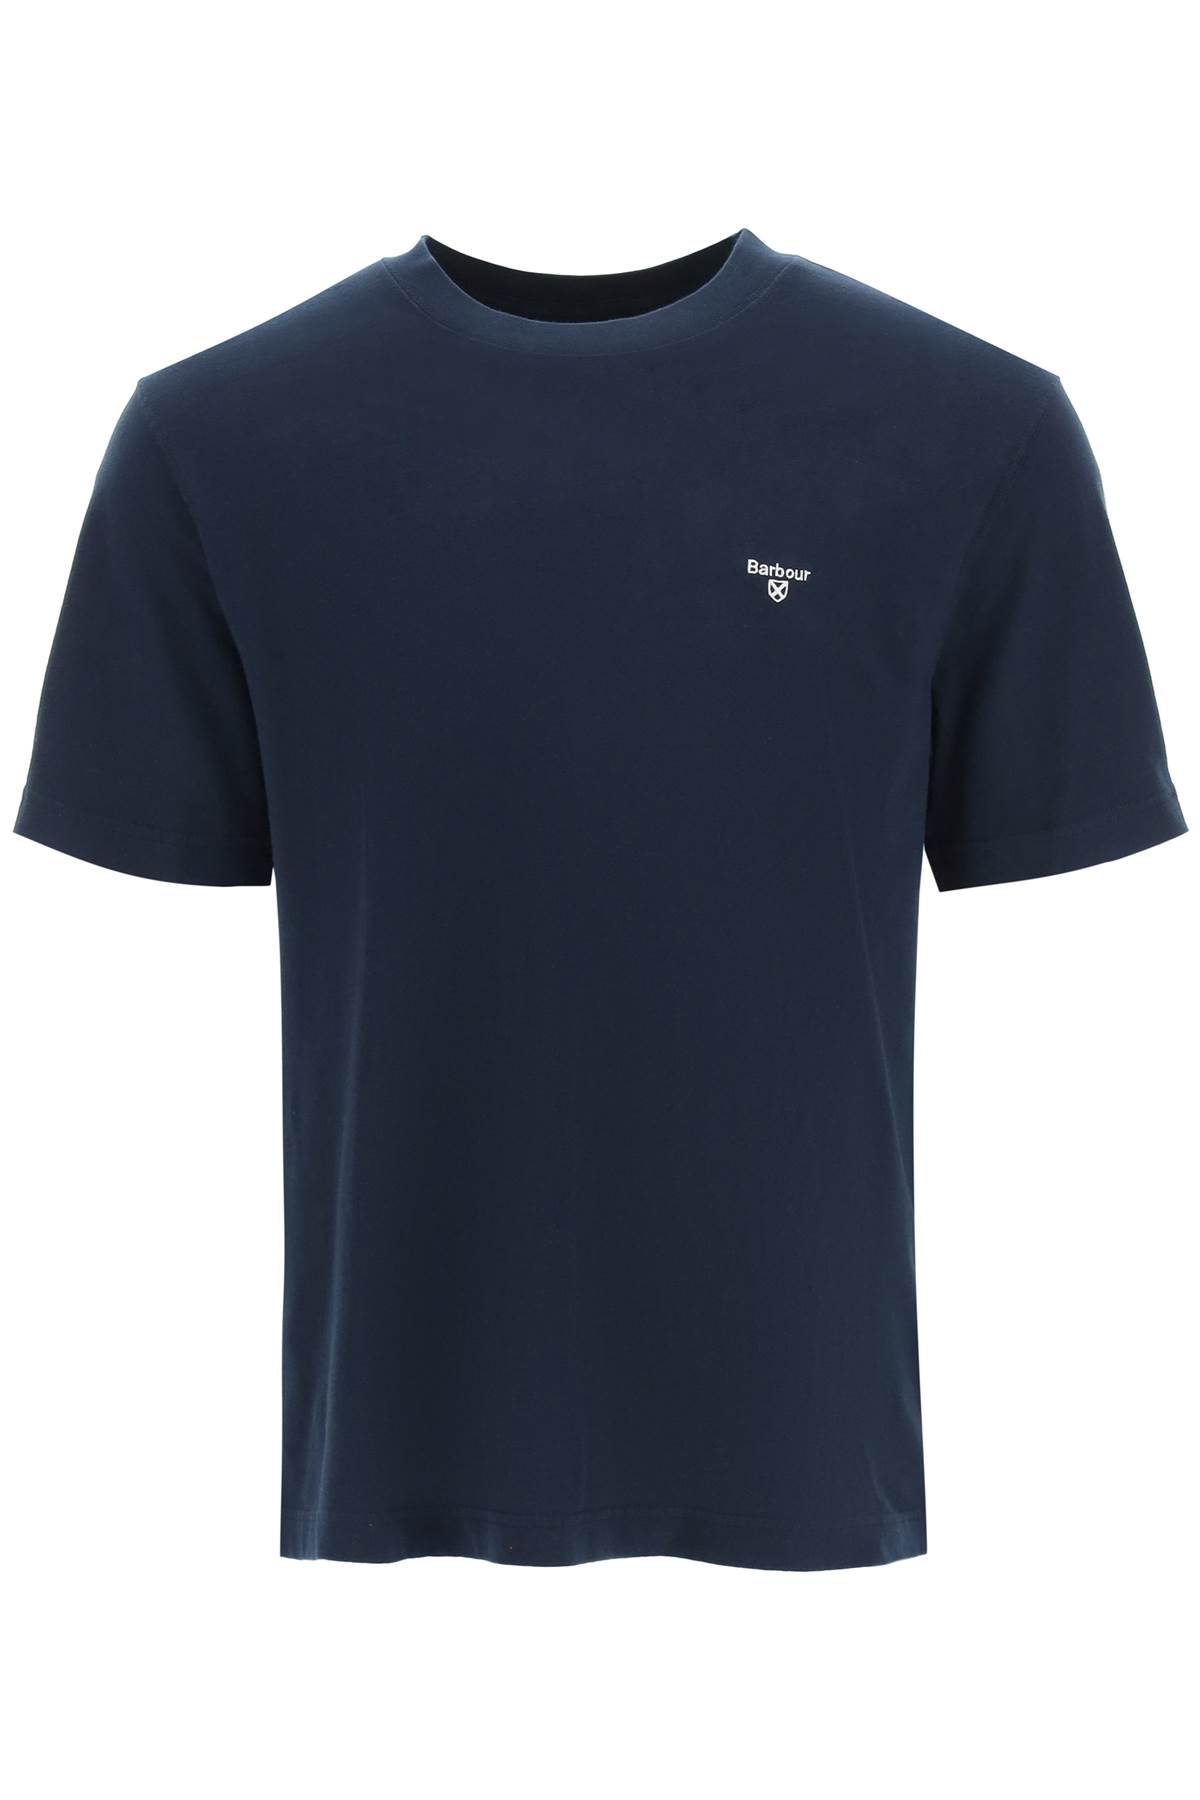 Barbour Embroidered Logo T-shirt